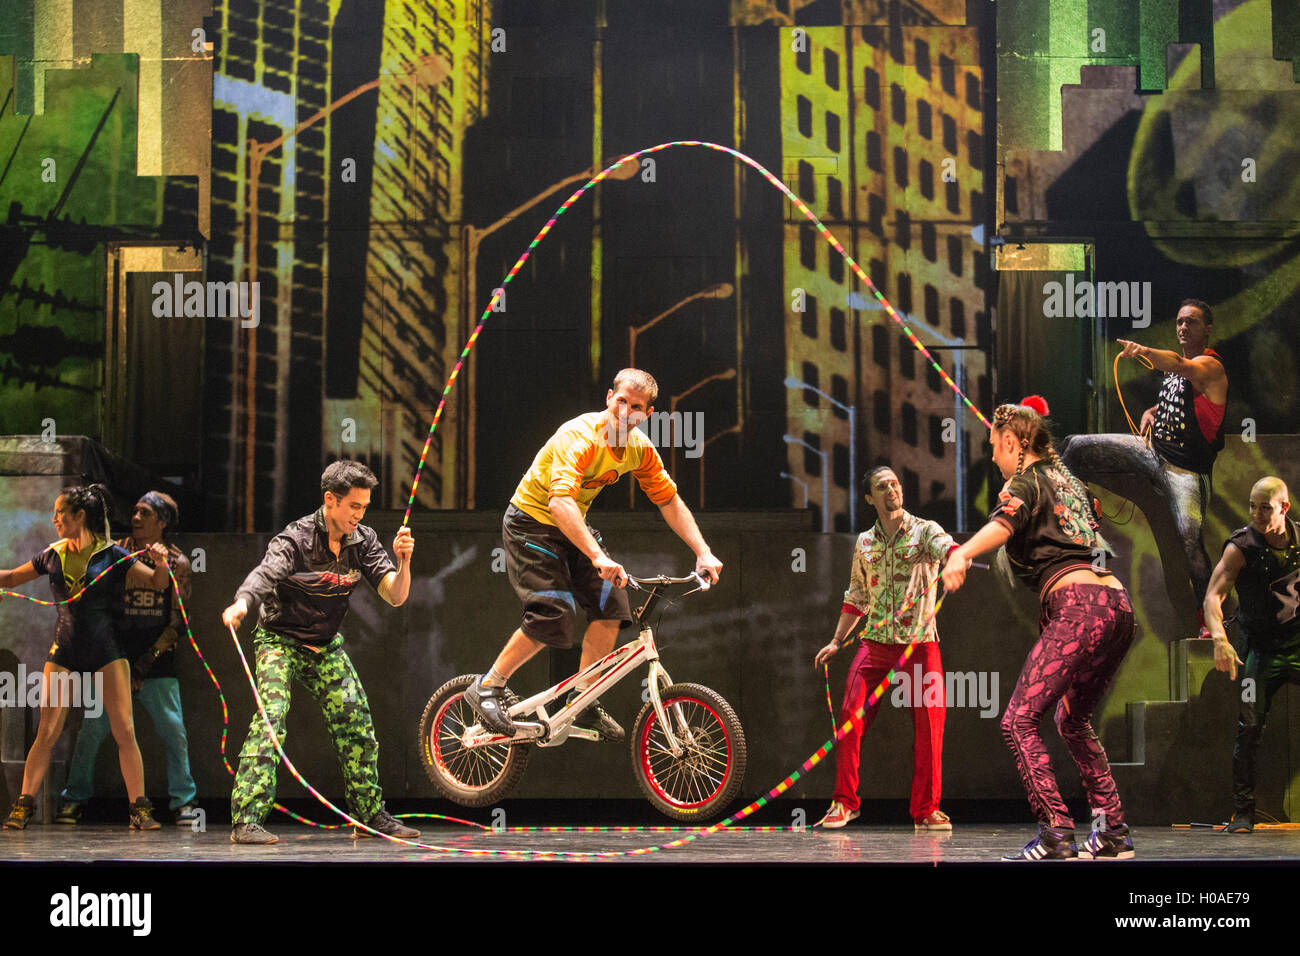 London, UK. 19 September 2016. Thiebaut Philippe performing on the trial bike. Dress rehearsal of iD, the latest show of Canadian contemporary circus crew Cirque Eloize at The Peacock theatre. iD blends daring stunts, circus arts, acrobatic skills and breakdance set in an urban streetscape. The show runs from 20 September to 8 October 2016. On 21 September, the show will celebrate its 1000th performance. Stock Photo